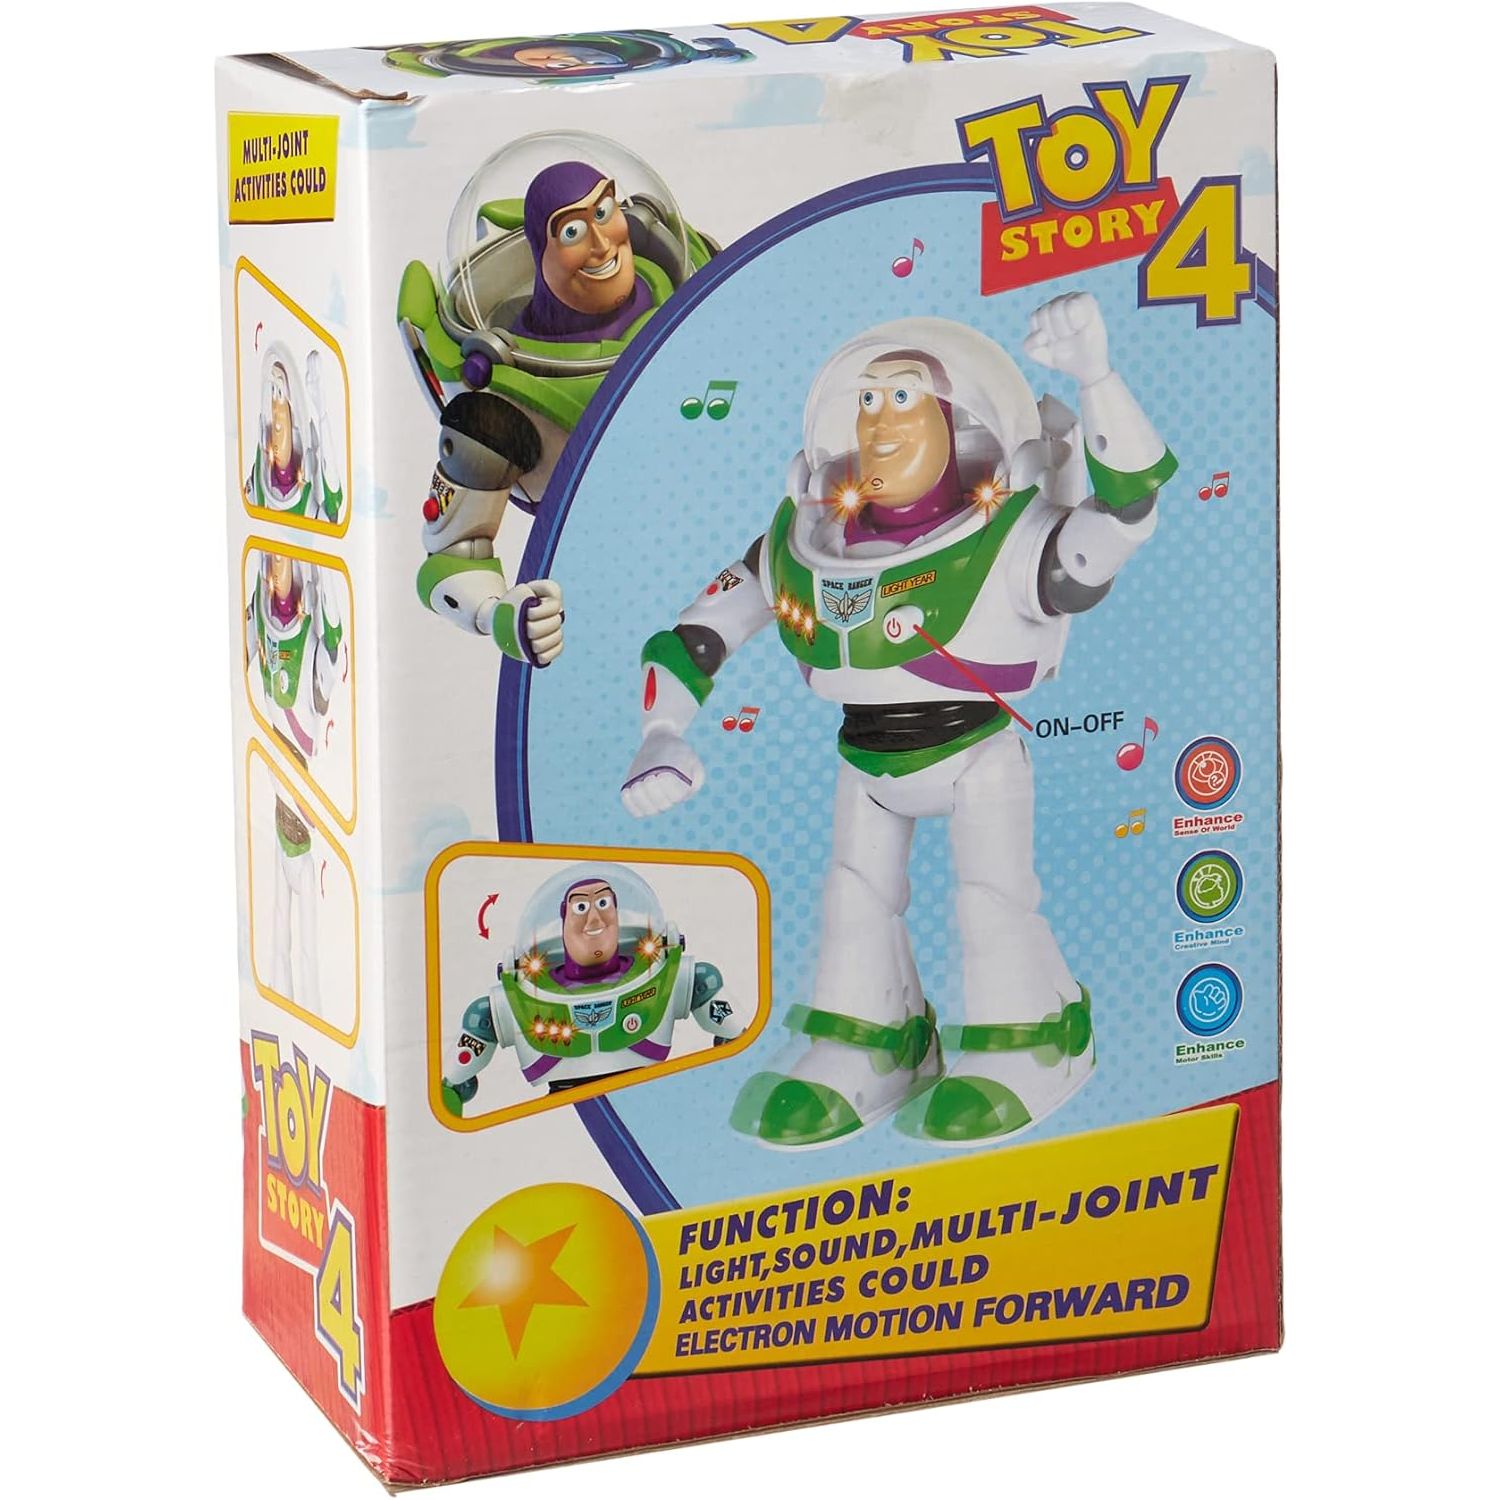 Toy Story Buzz Light year Action Figure